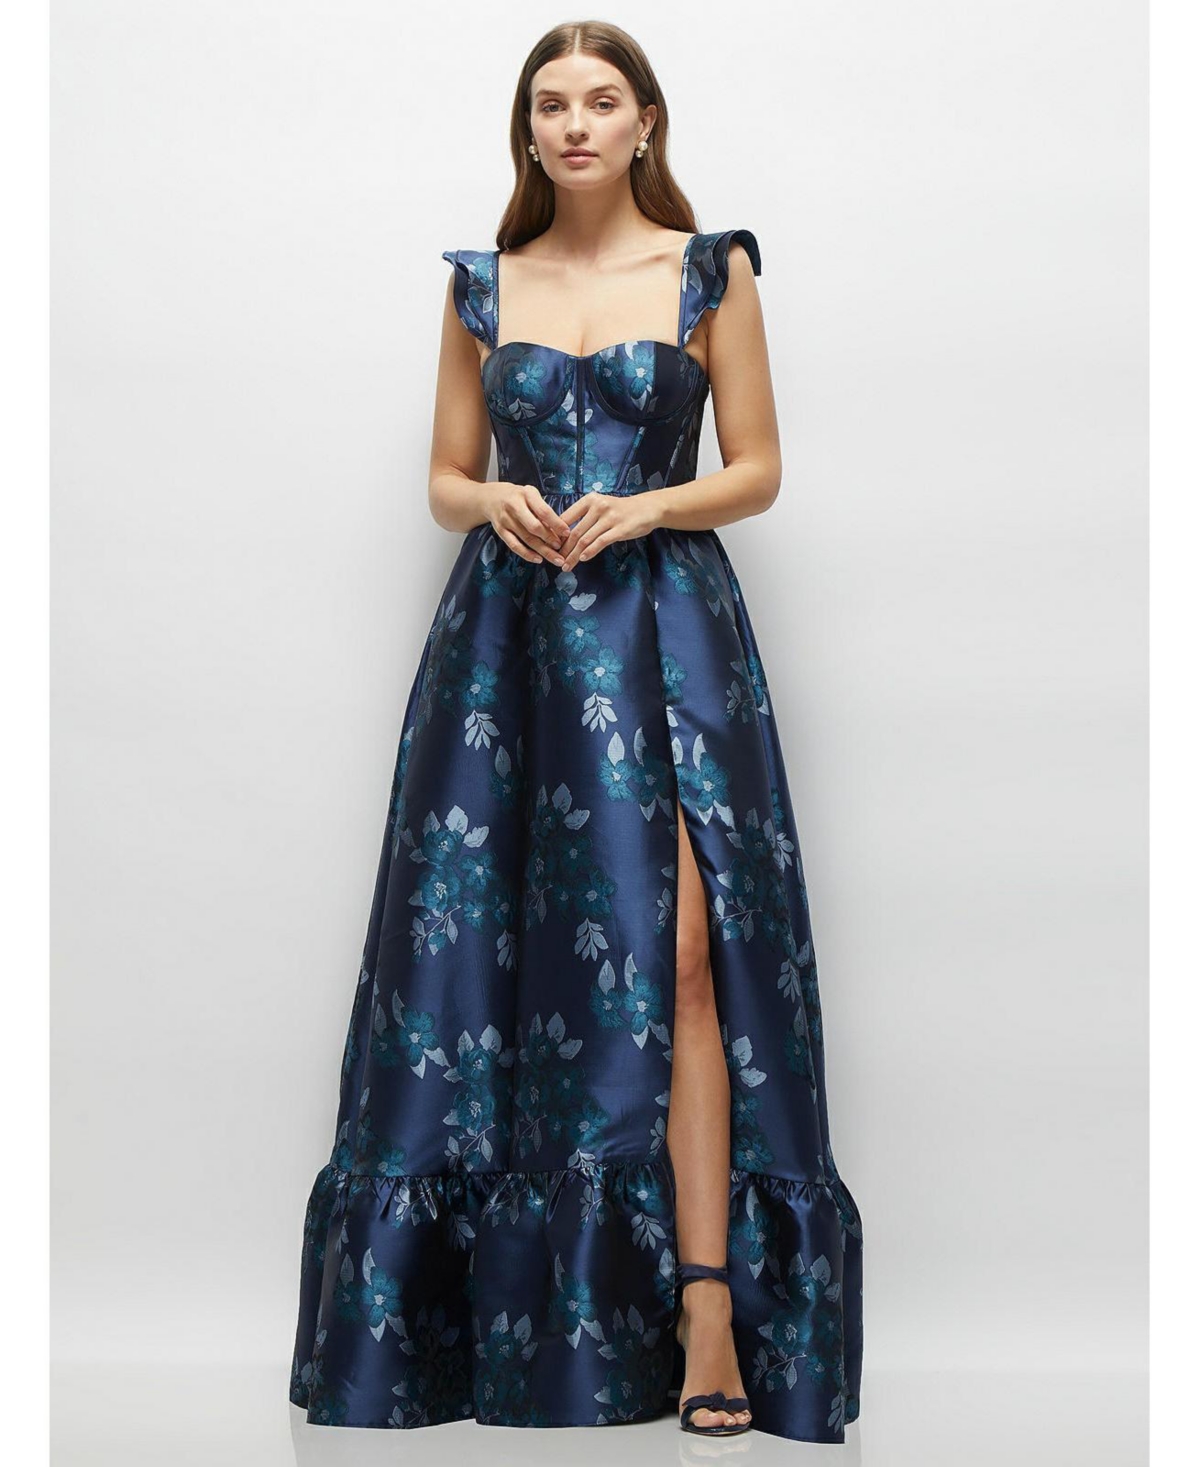 Women's Baroque Rose Damask Floral Corset Maxi Dress with Ruffle Straps & Skirt - Midnight navy damask